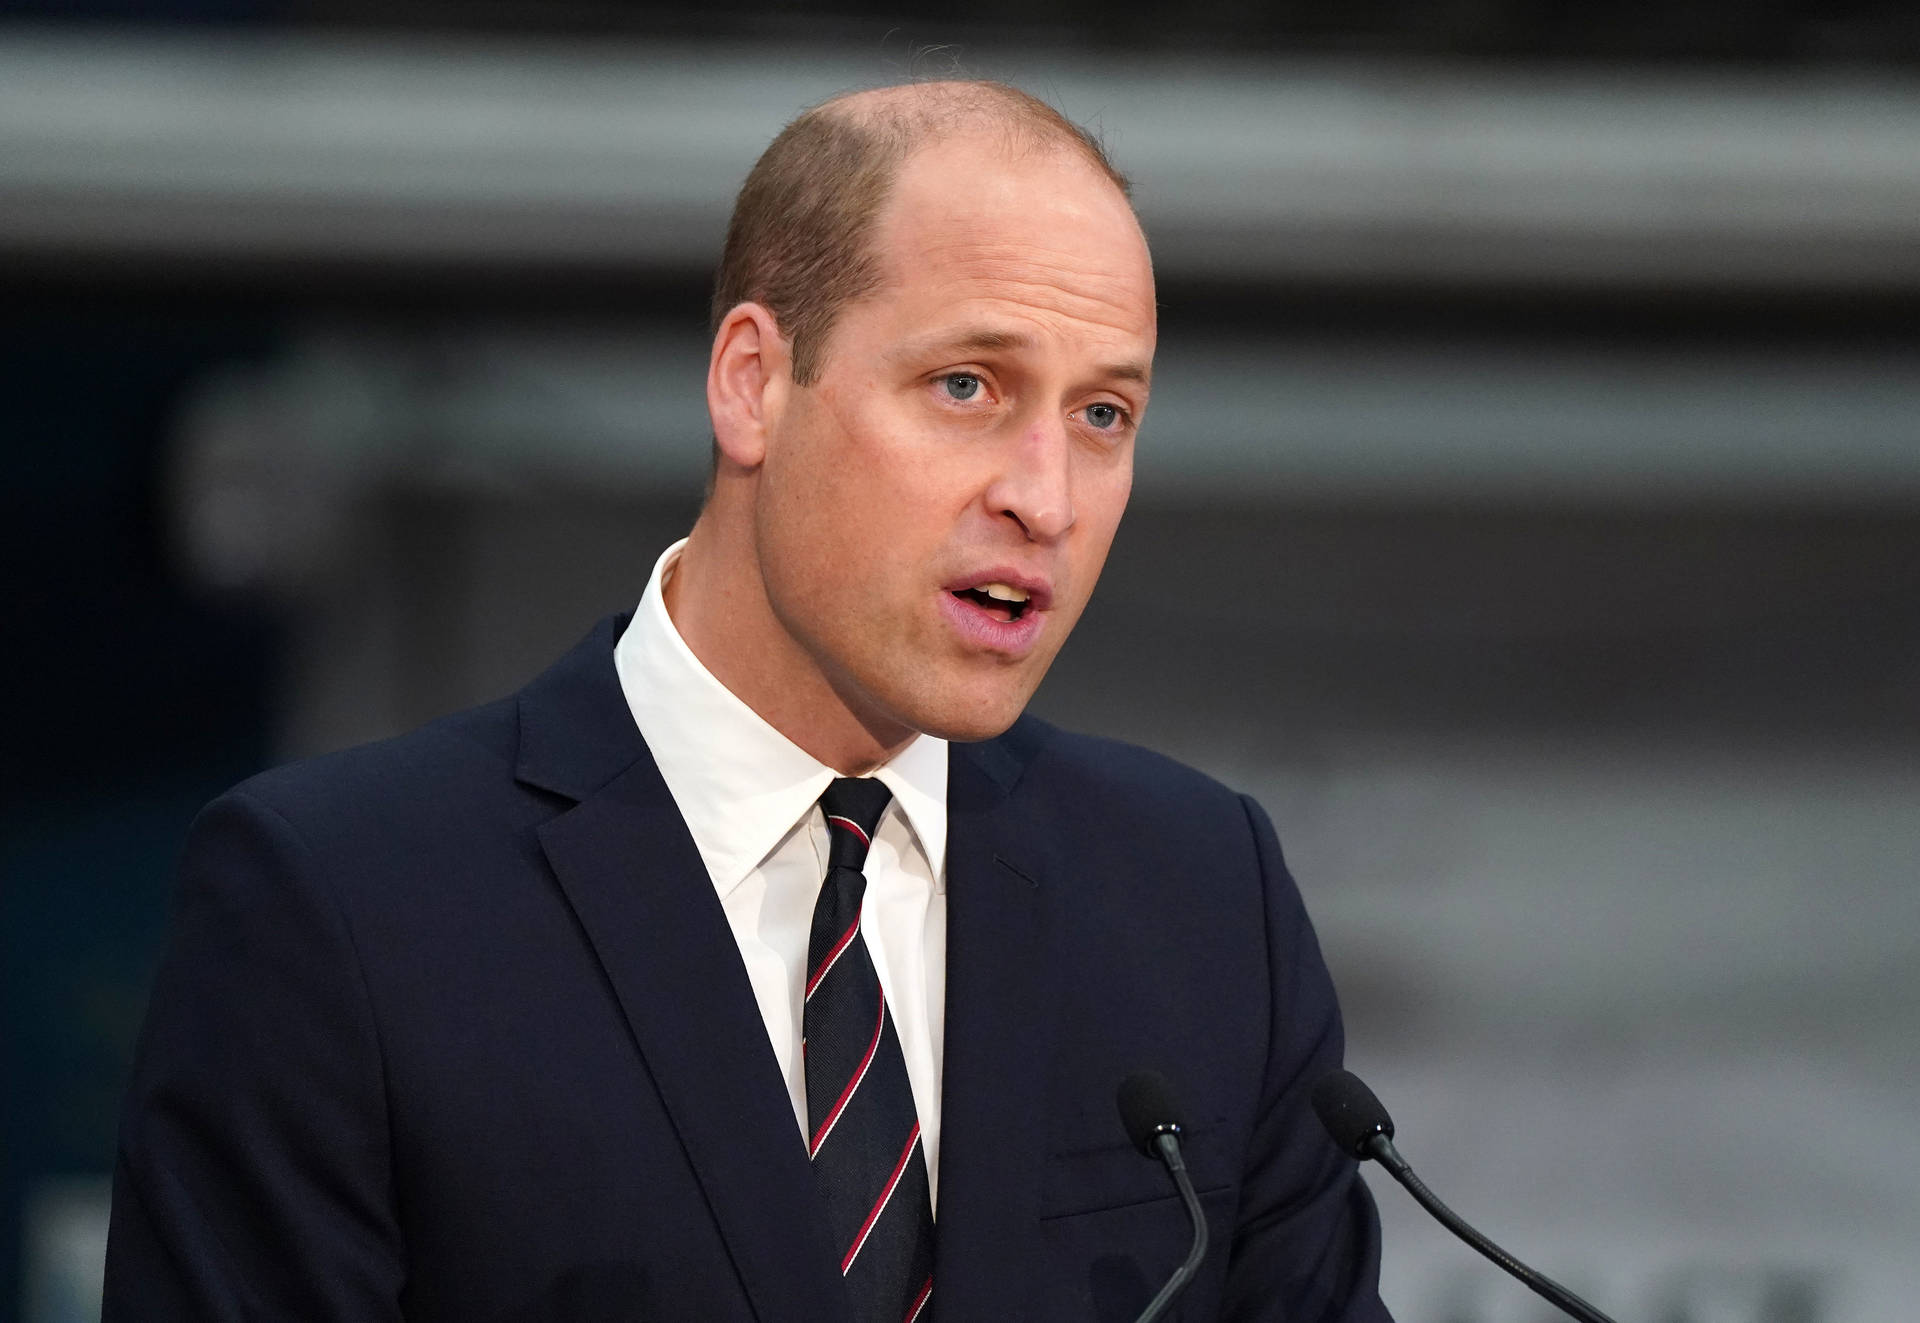 Prince William Delivering A Speech Background